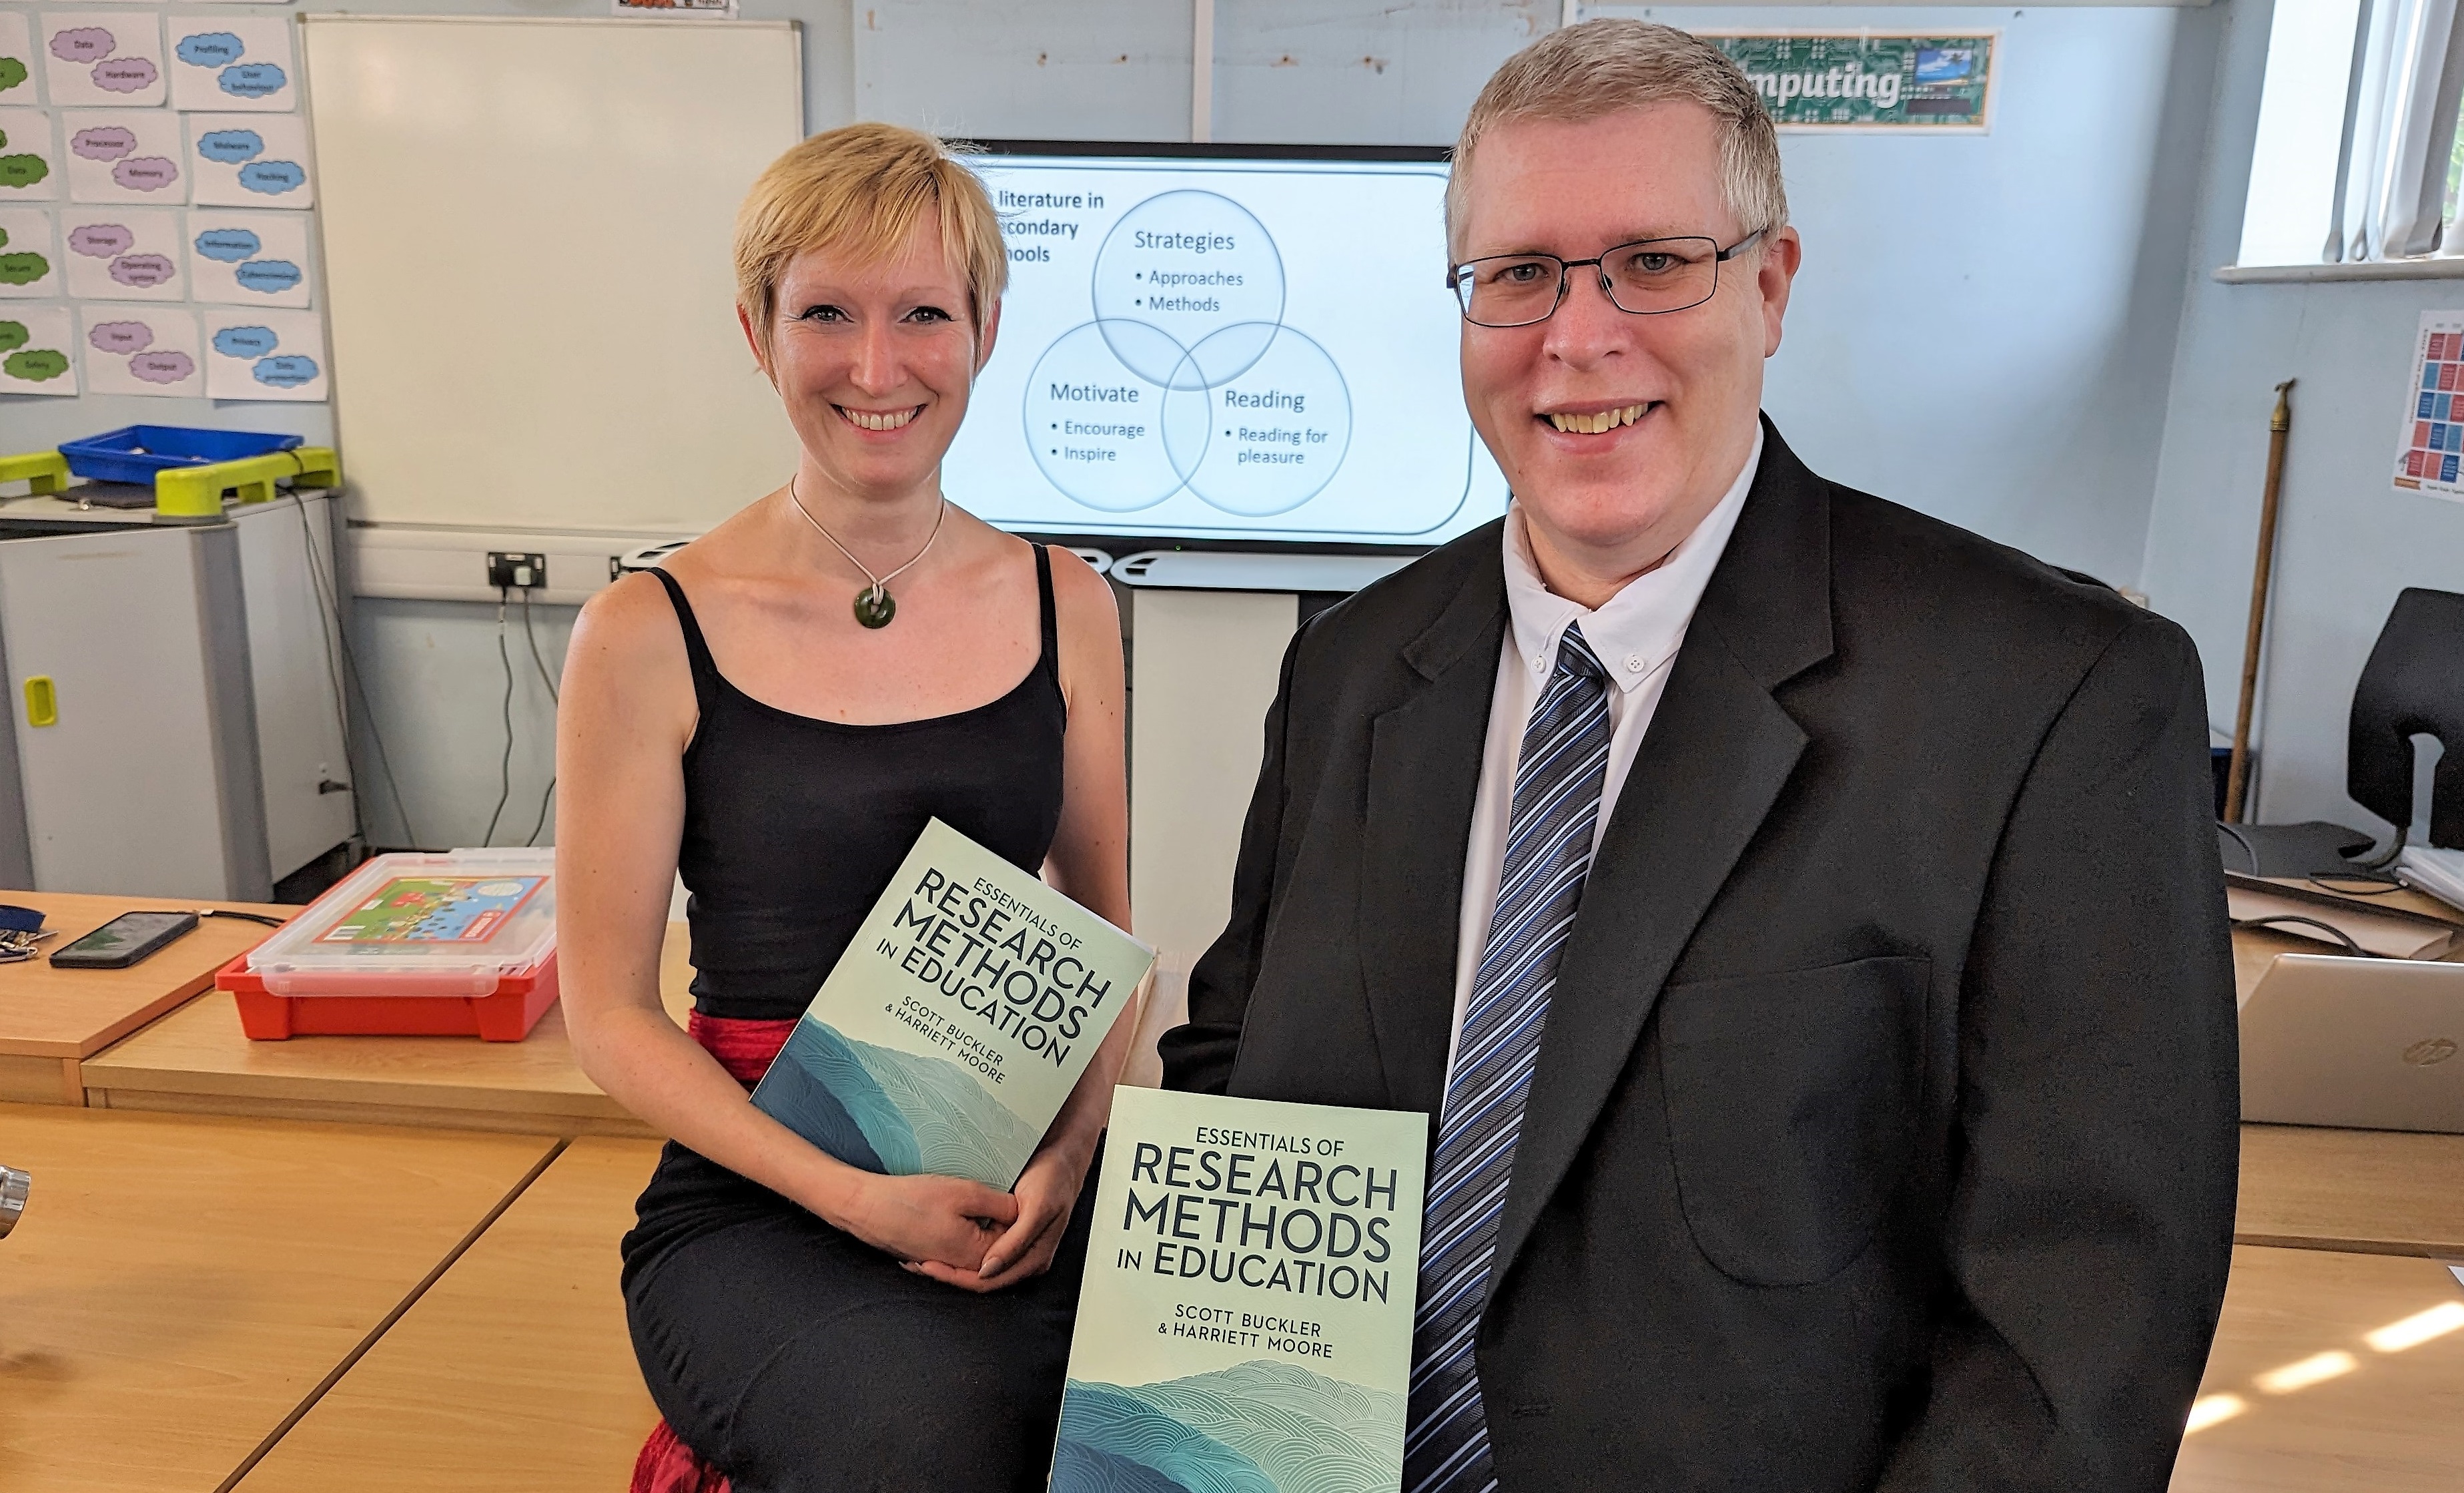 Education Authors Delighted With Research Method Book Response